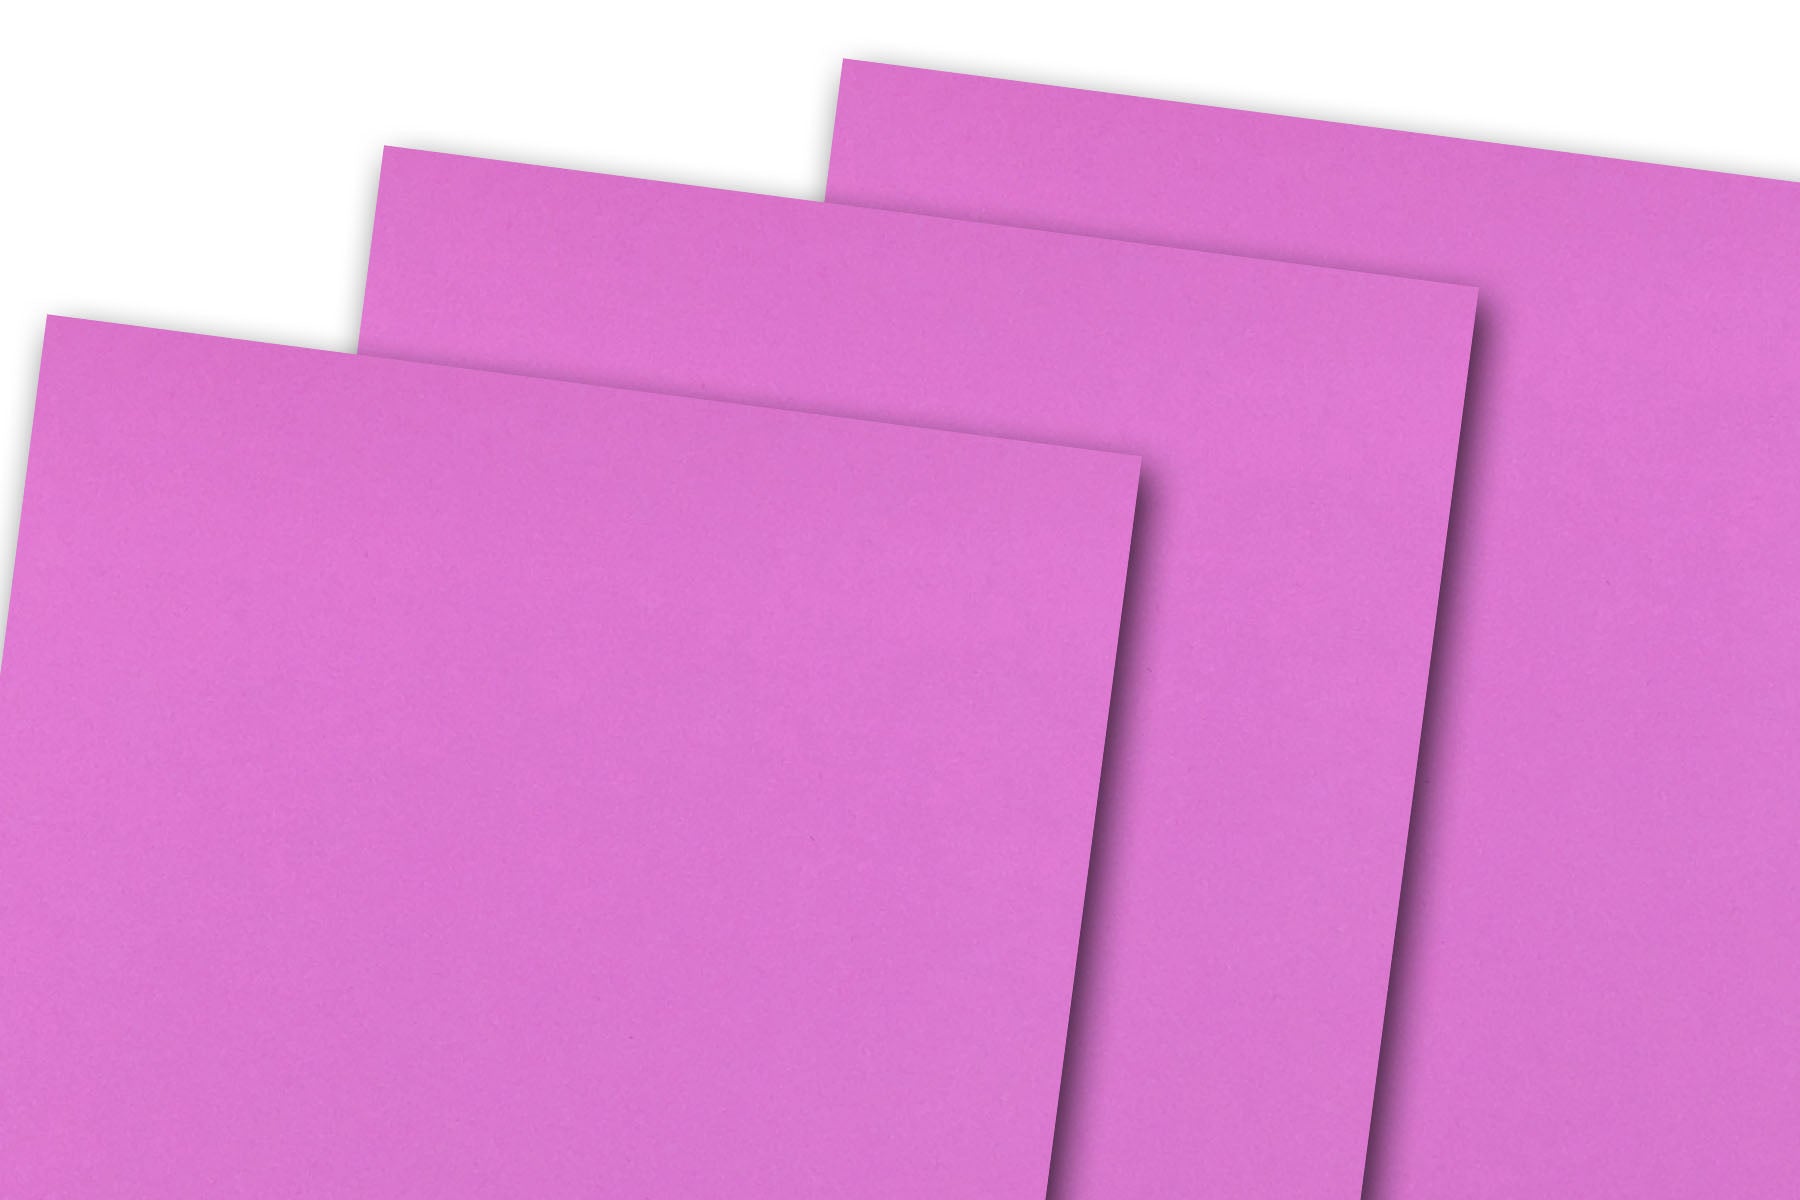 A2 NEW Astrobright Color,White or Vanilla Paper Envelopes 4 3/8 x 5 3/4  PE28 - Helia Beer Co